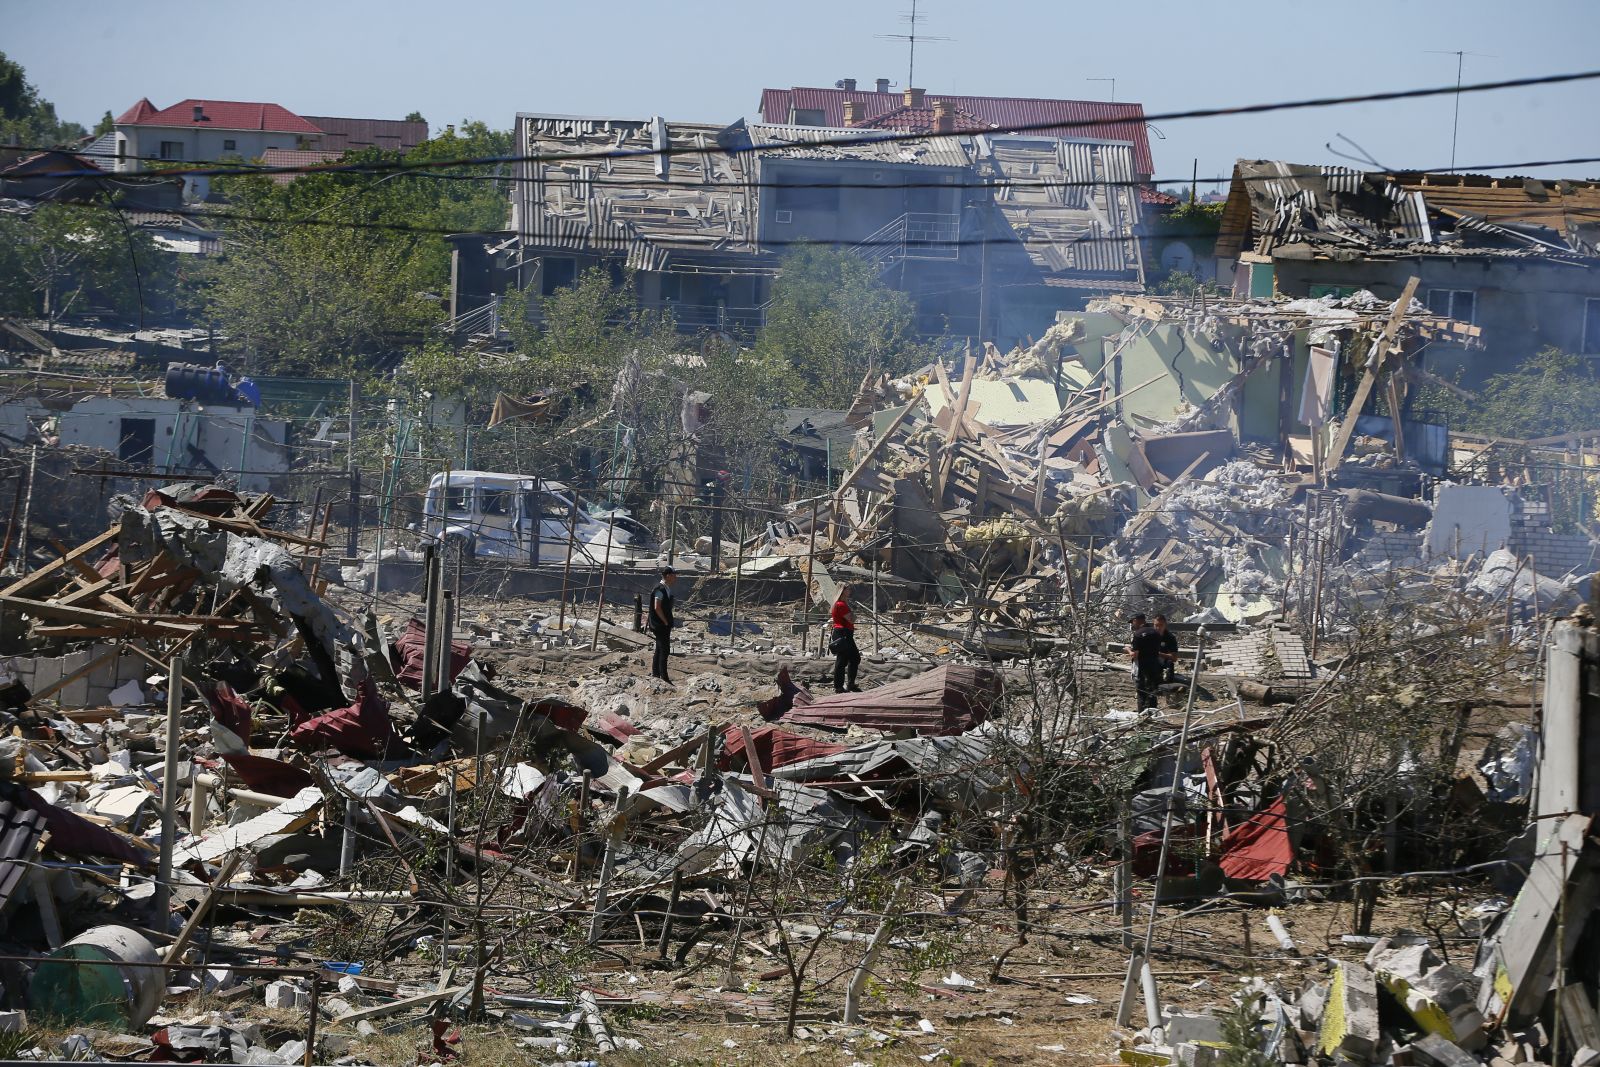 epa10092249 Rescuers and policemen inspect a site of a missile strike in Odesa area, Ukraine, 26 July 2022. A massive missile strike was inflicted on the south of Ukraine in the wee hours of 26 July by Russian forces from the waters of the Black Sea, the spokesperson of the Command of the Air Force of the Armed Forces of Ukraine said. Several private buildings and infrastructure objects were destroyed, no fatalities in that attack were reported. Russian troops on 24 February entered Ukrainian territory, starting a conflict that has provoked destruction and a humanitarian crisis.  EPA/STRINGER